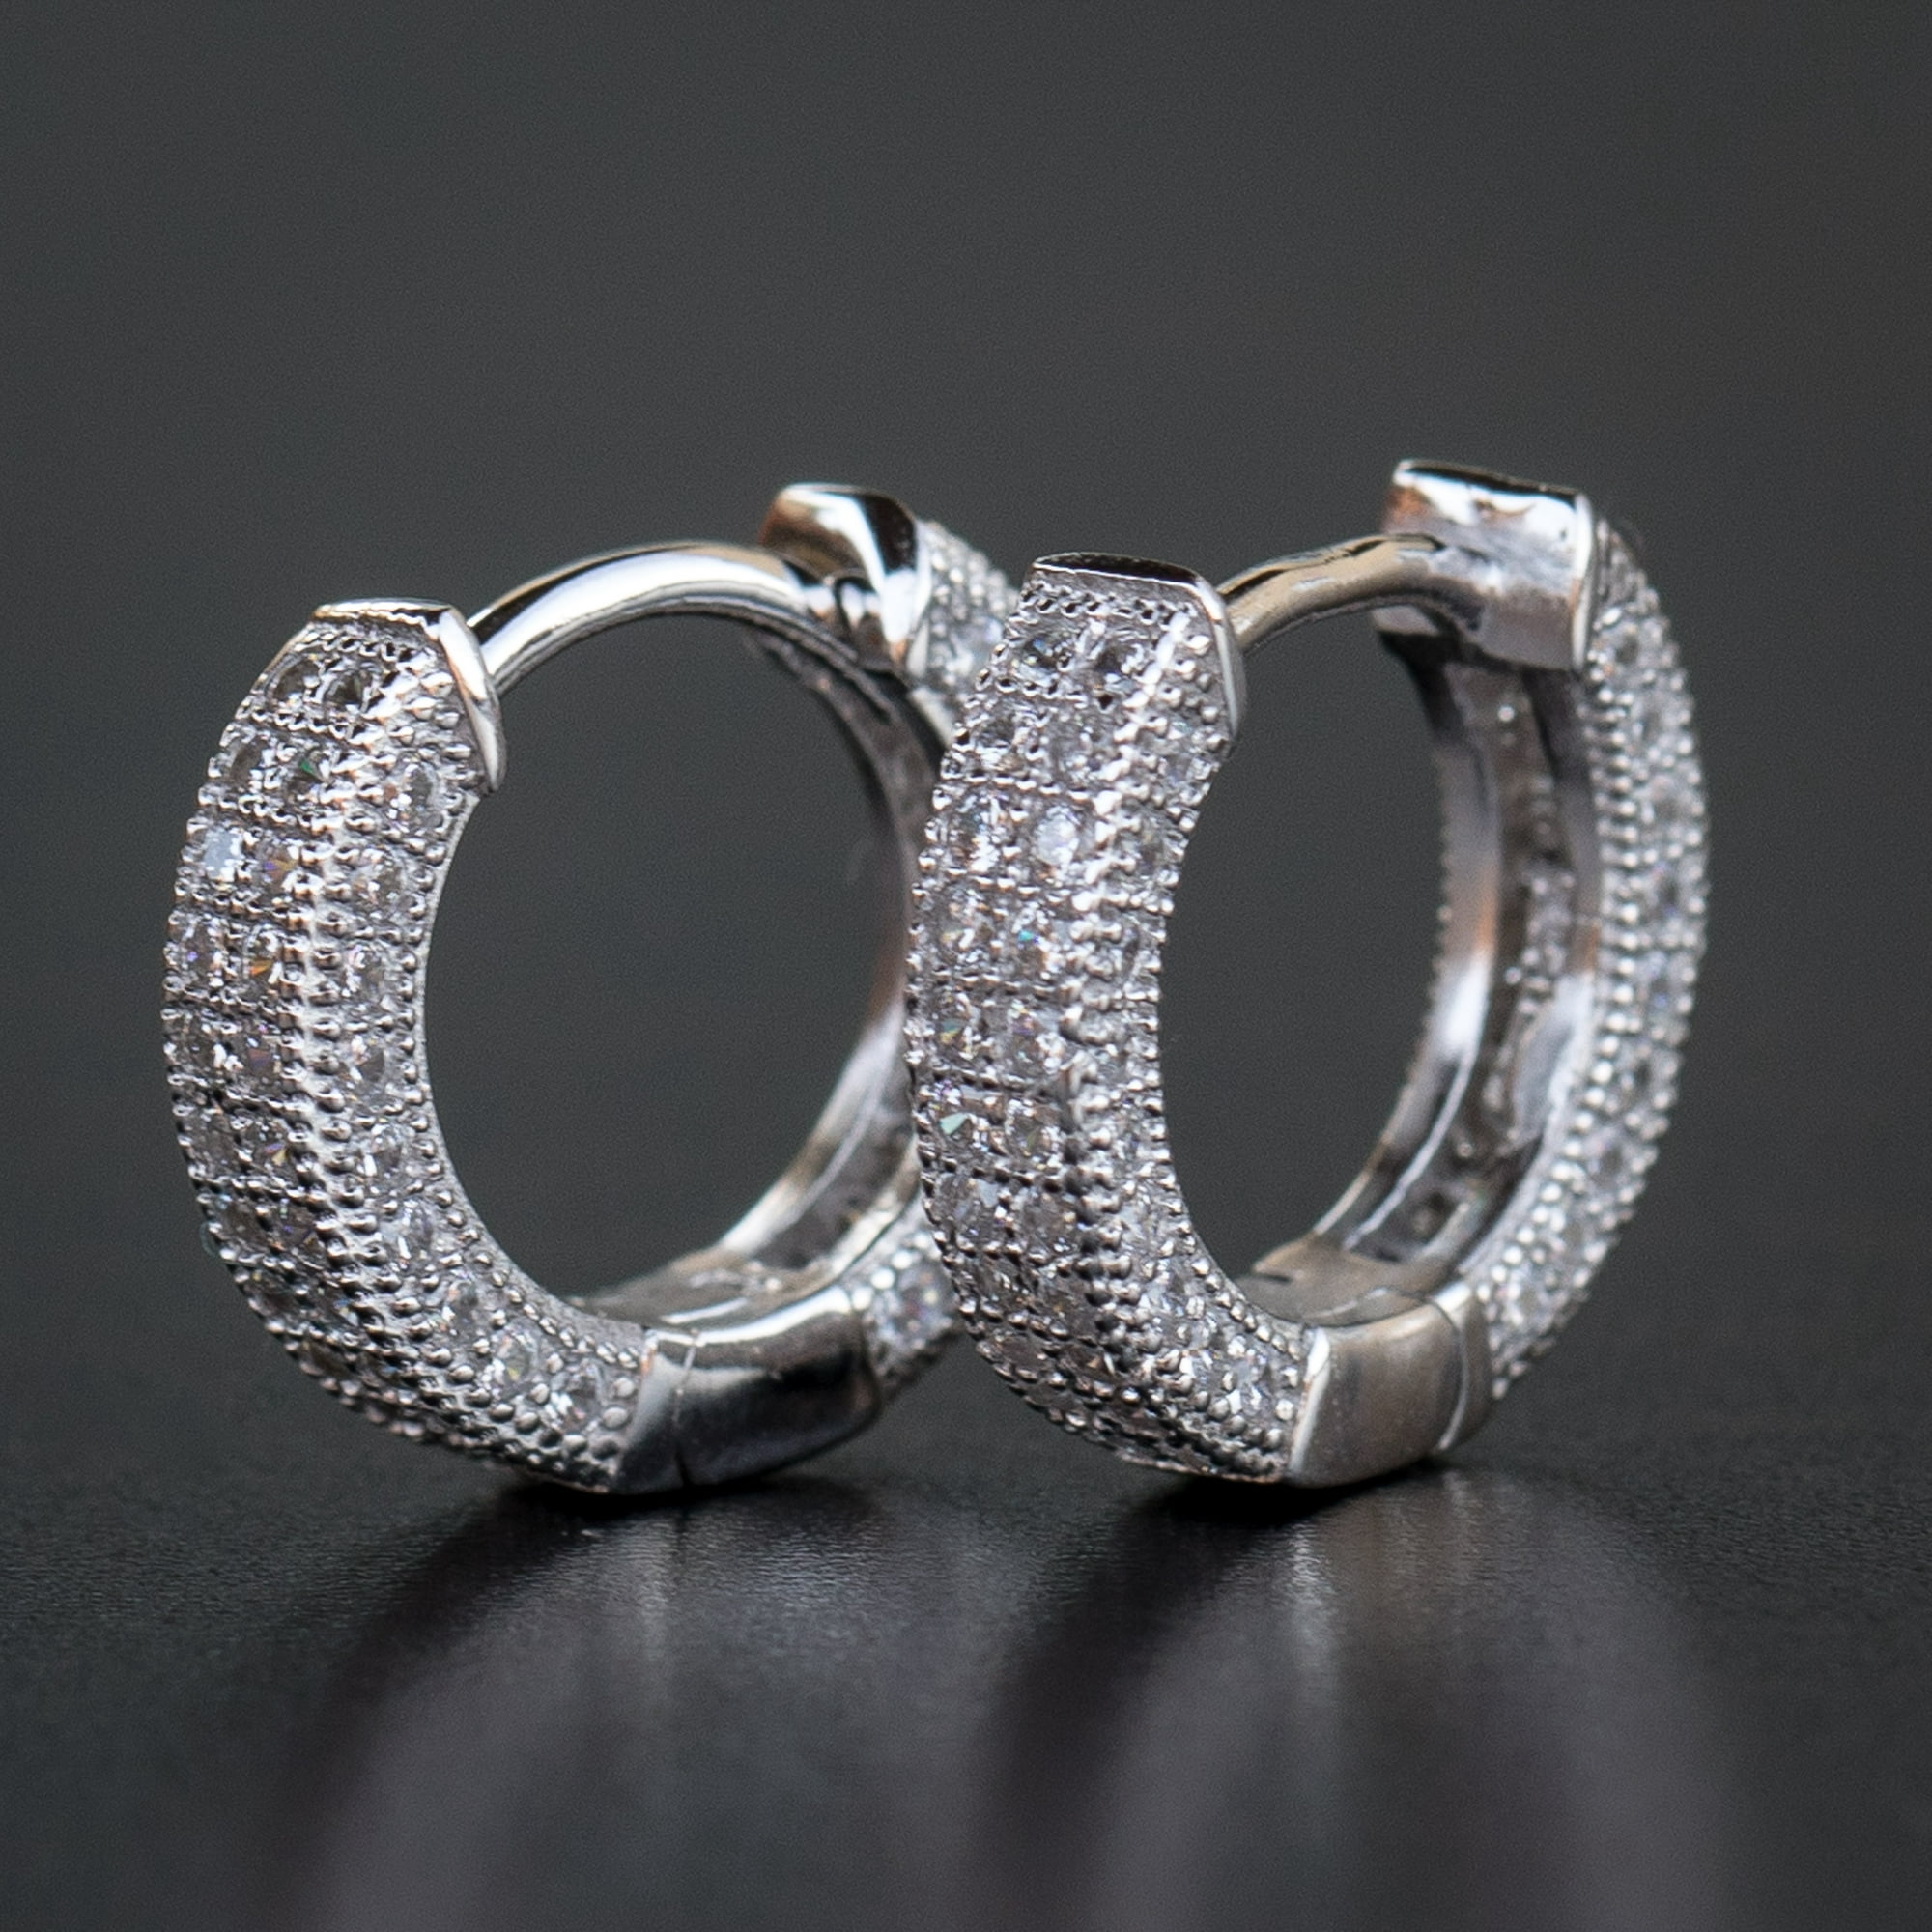 Small Size Mens White Gold Plated 925 Sterling Silver CZ Hoop Earrings